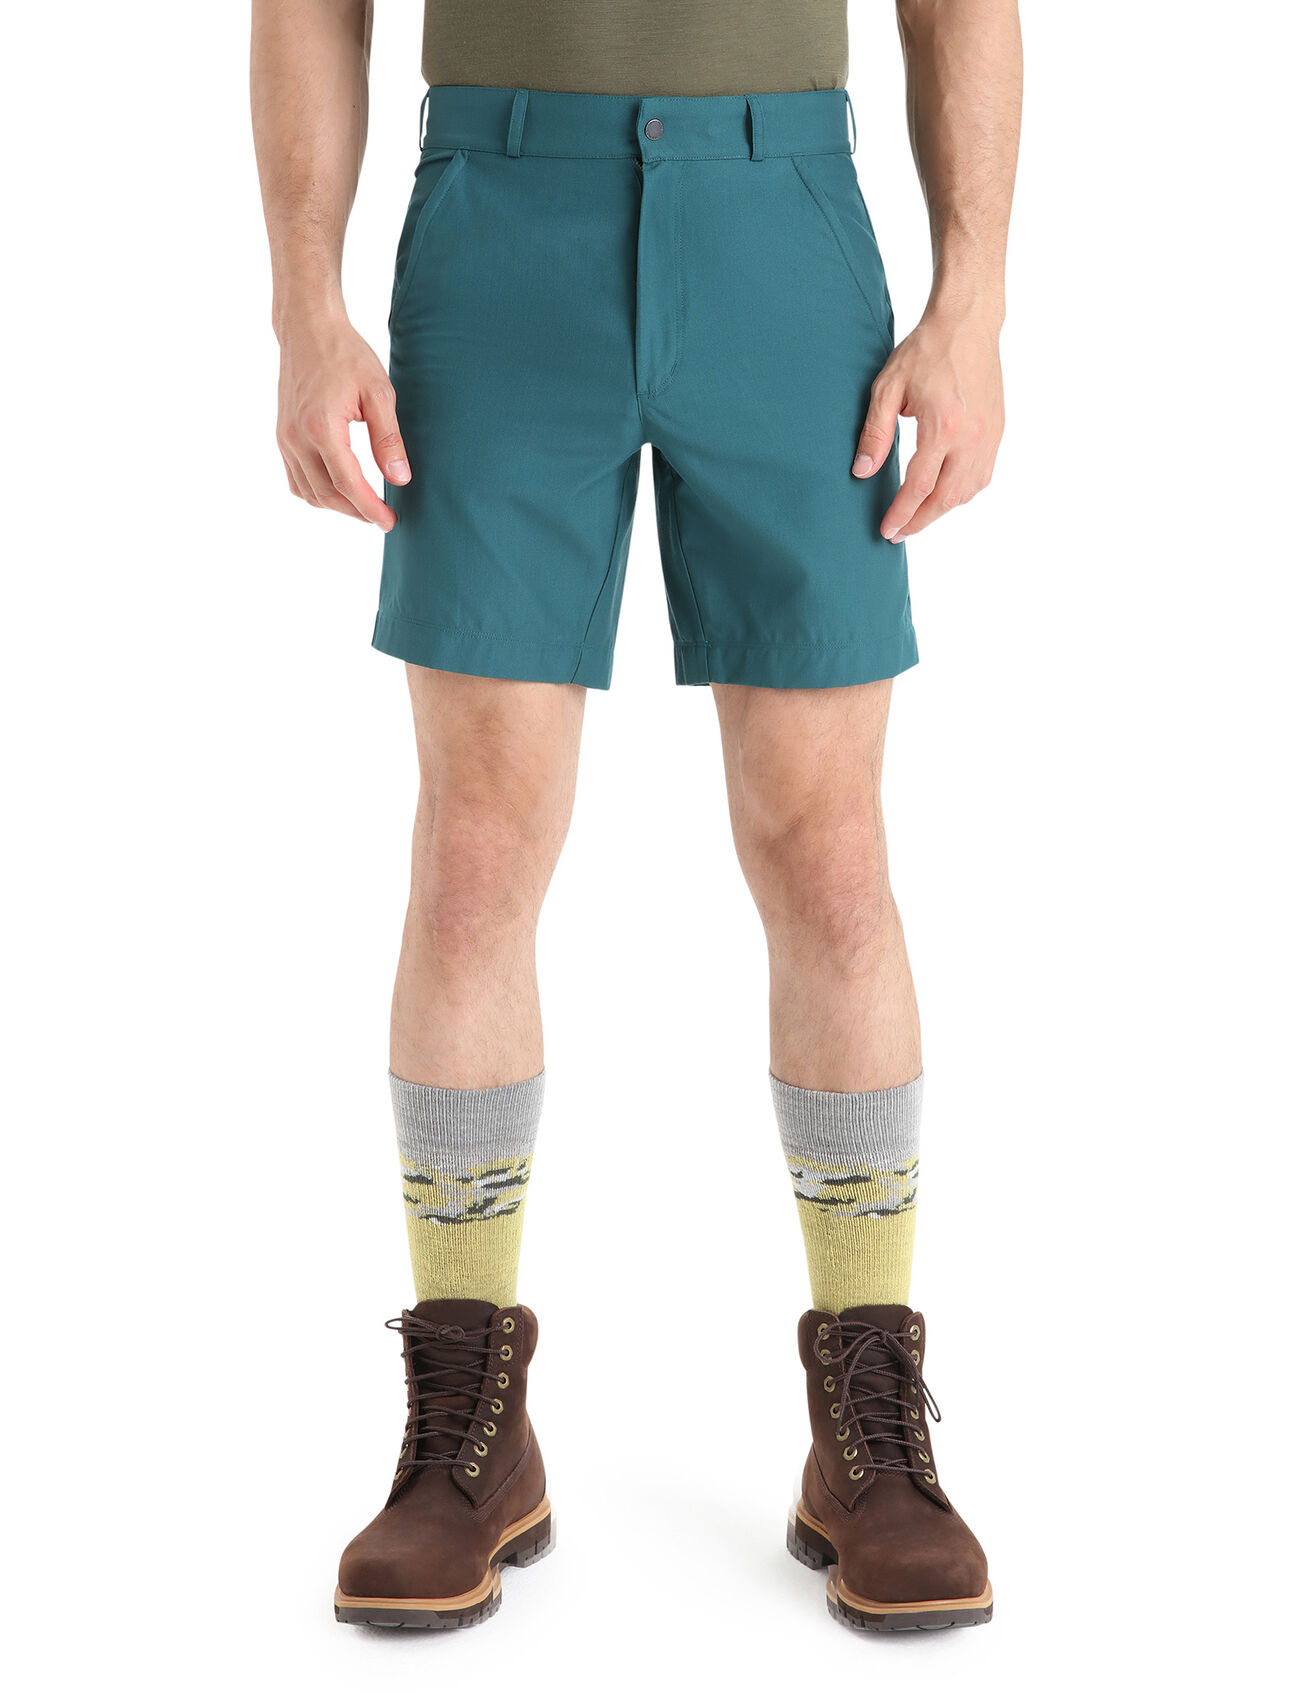 Mens Merino Hike Shorts A durable and dependable mountain short made from a unique blend of merino wool and organically grown cotton, the Hike Shorts are perfect for mountain adventures of all kinds.